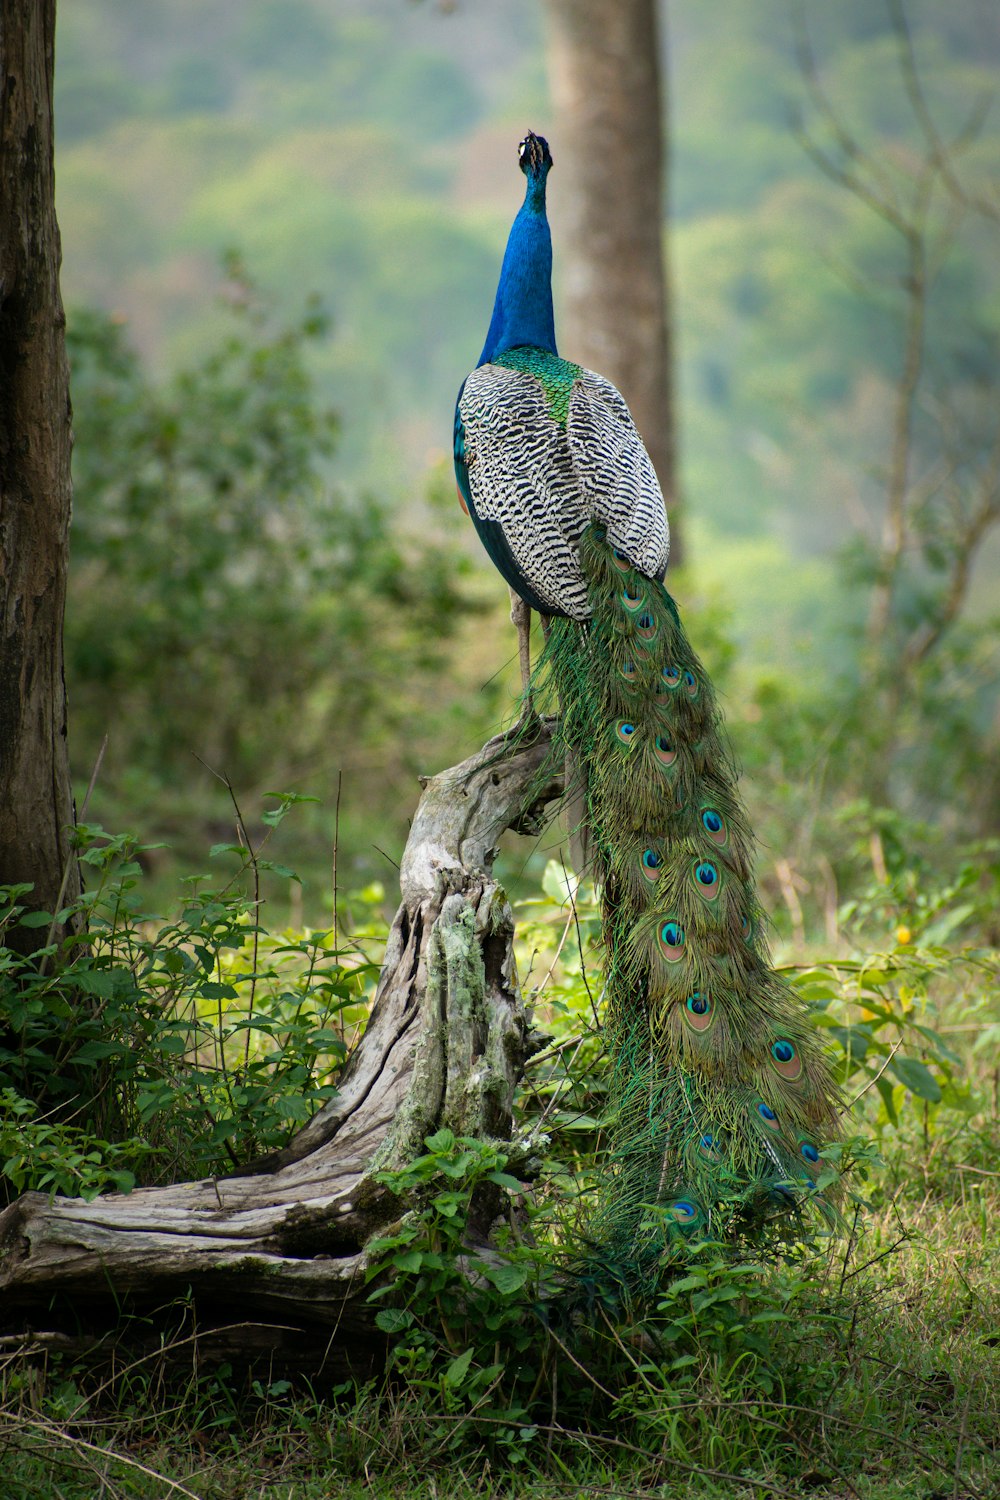 a peacock standing on a tree branch